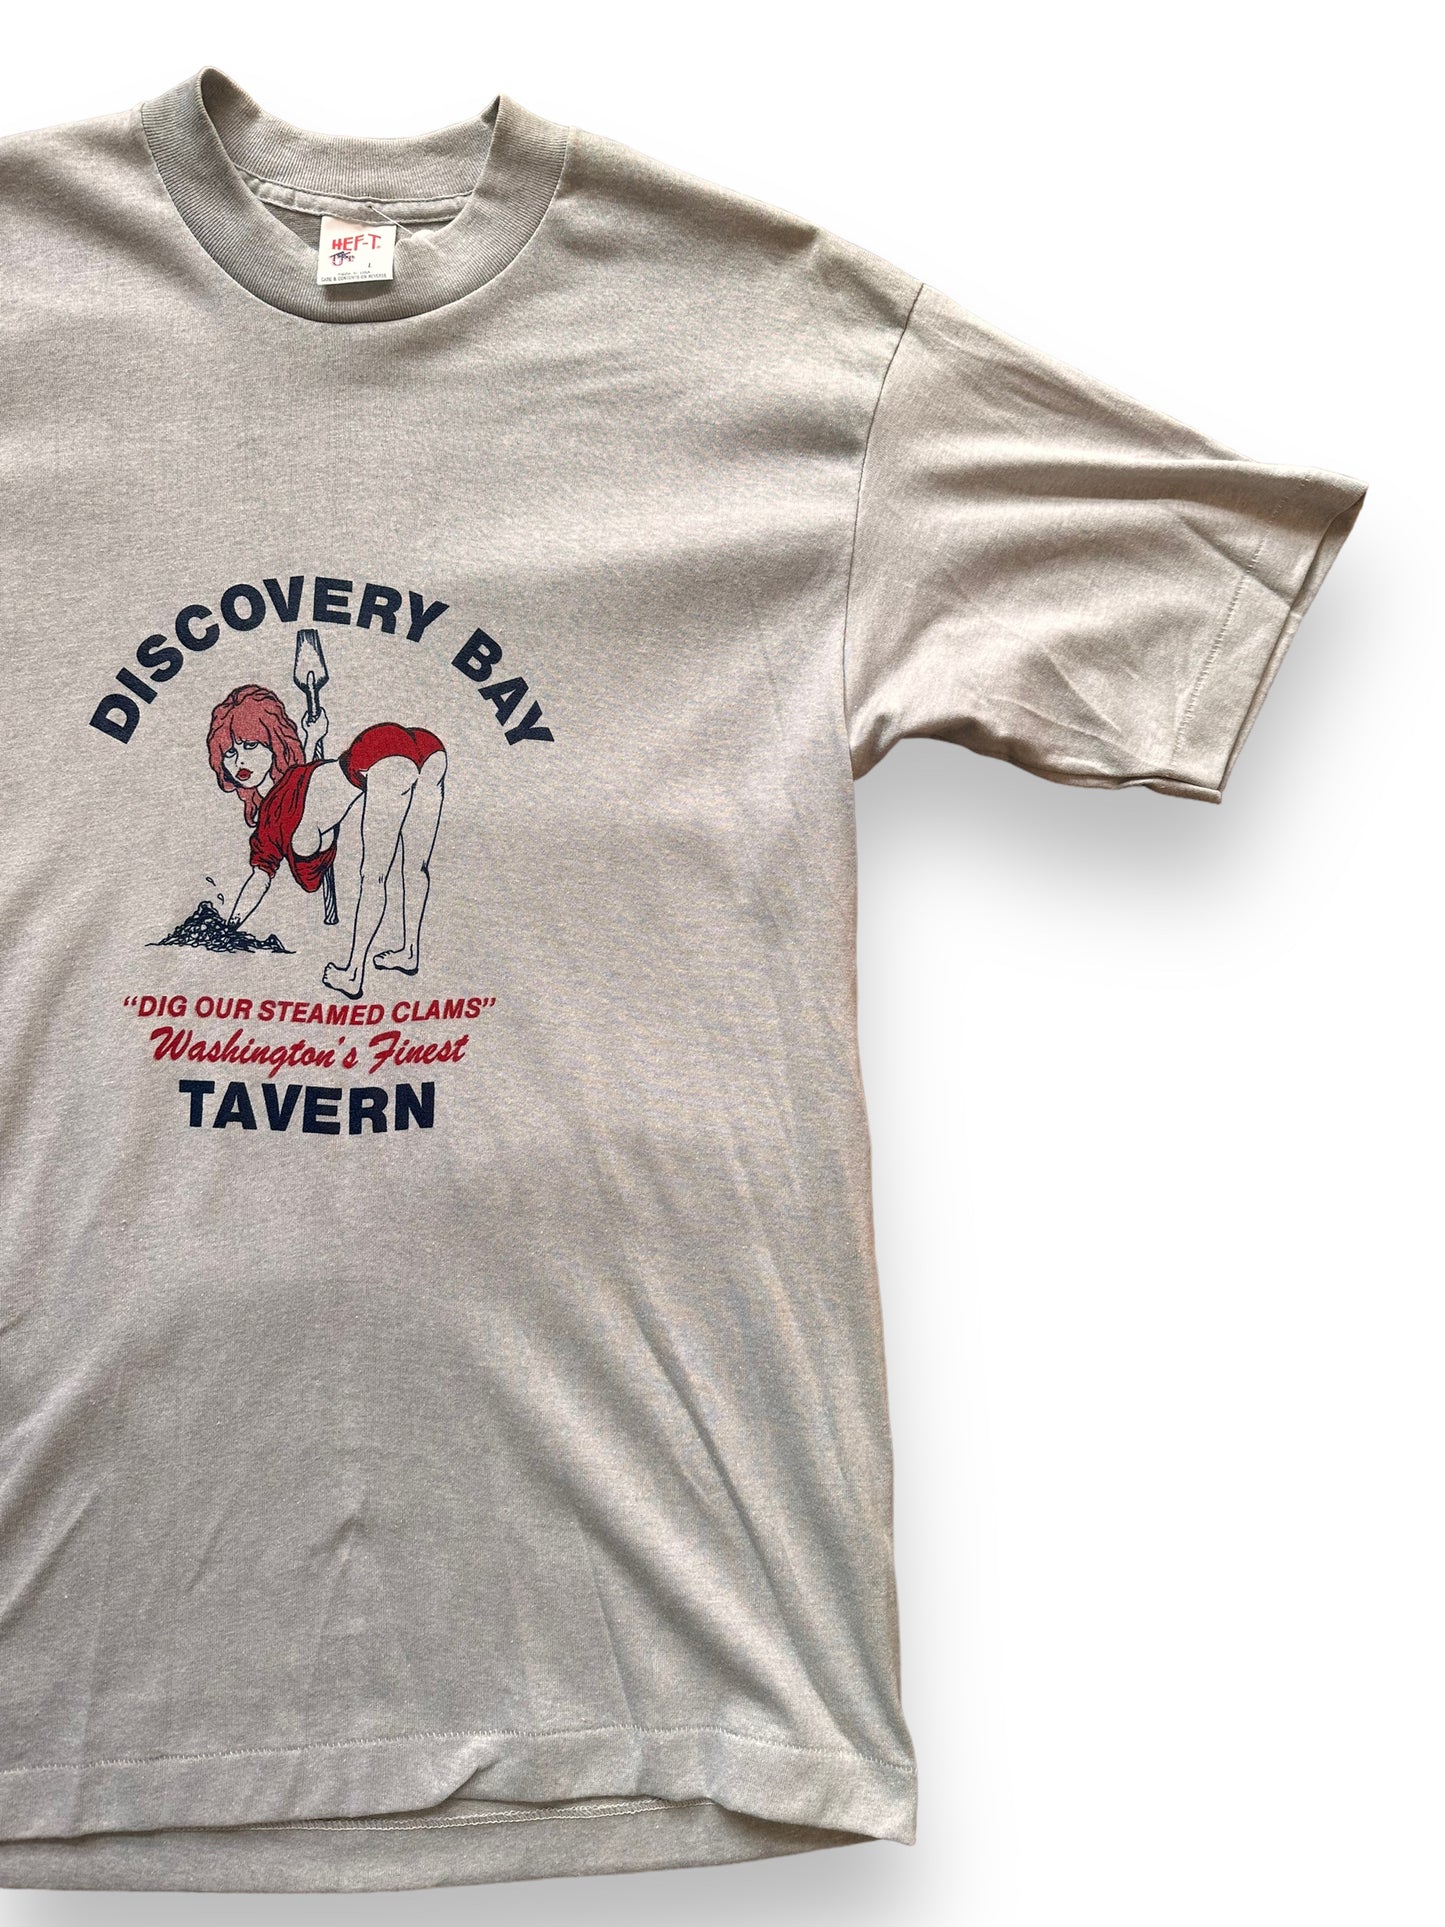 Front Left View of Vintage Discovery Bay Tavern Tee SZ S |  Vintage Port Townsend Steamed Clam Tee | Vintage Clothing Seattle